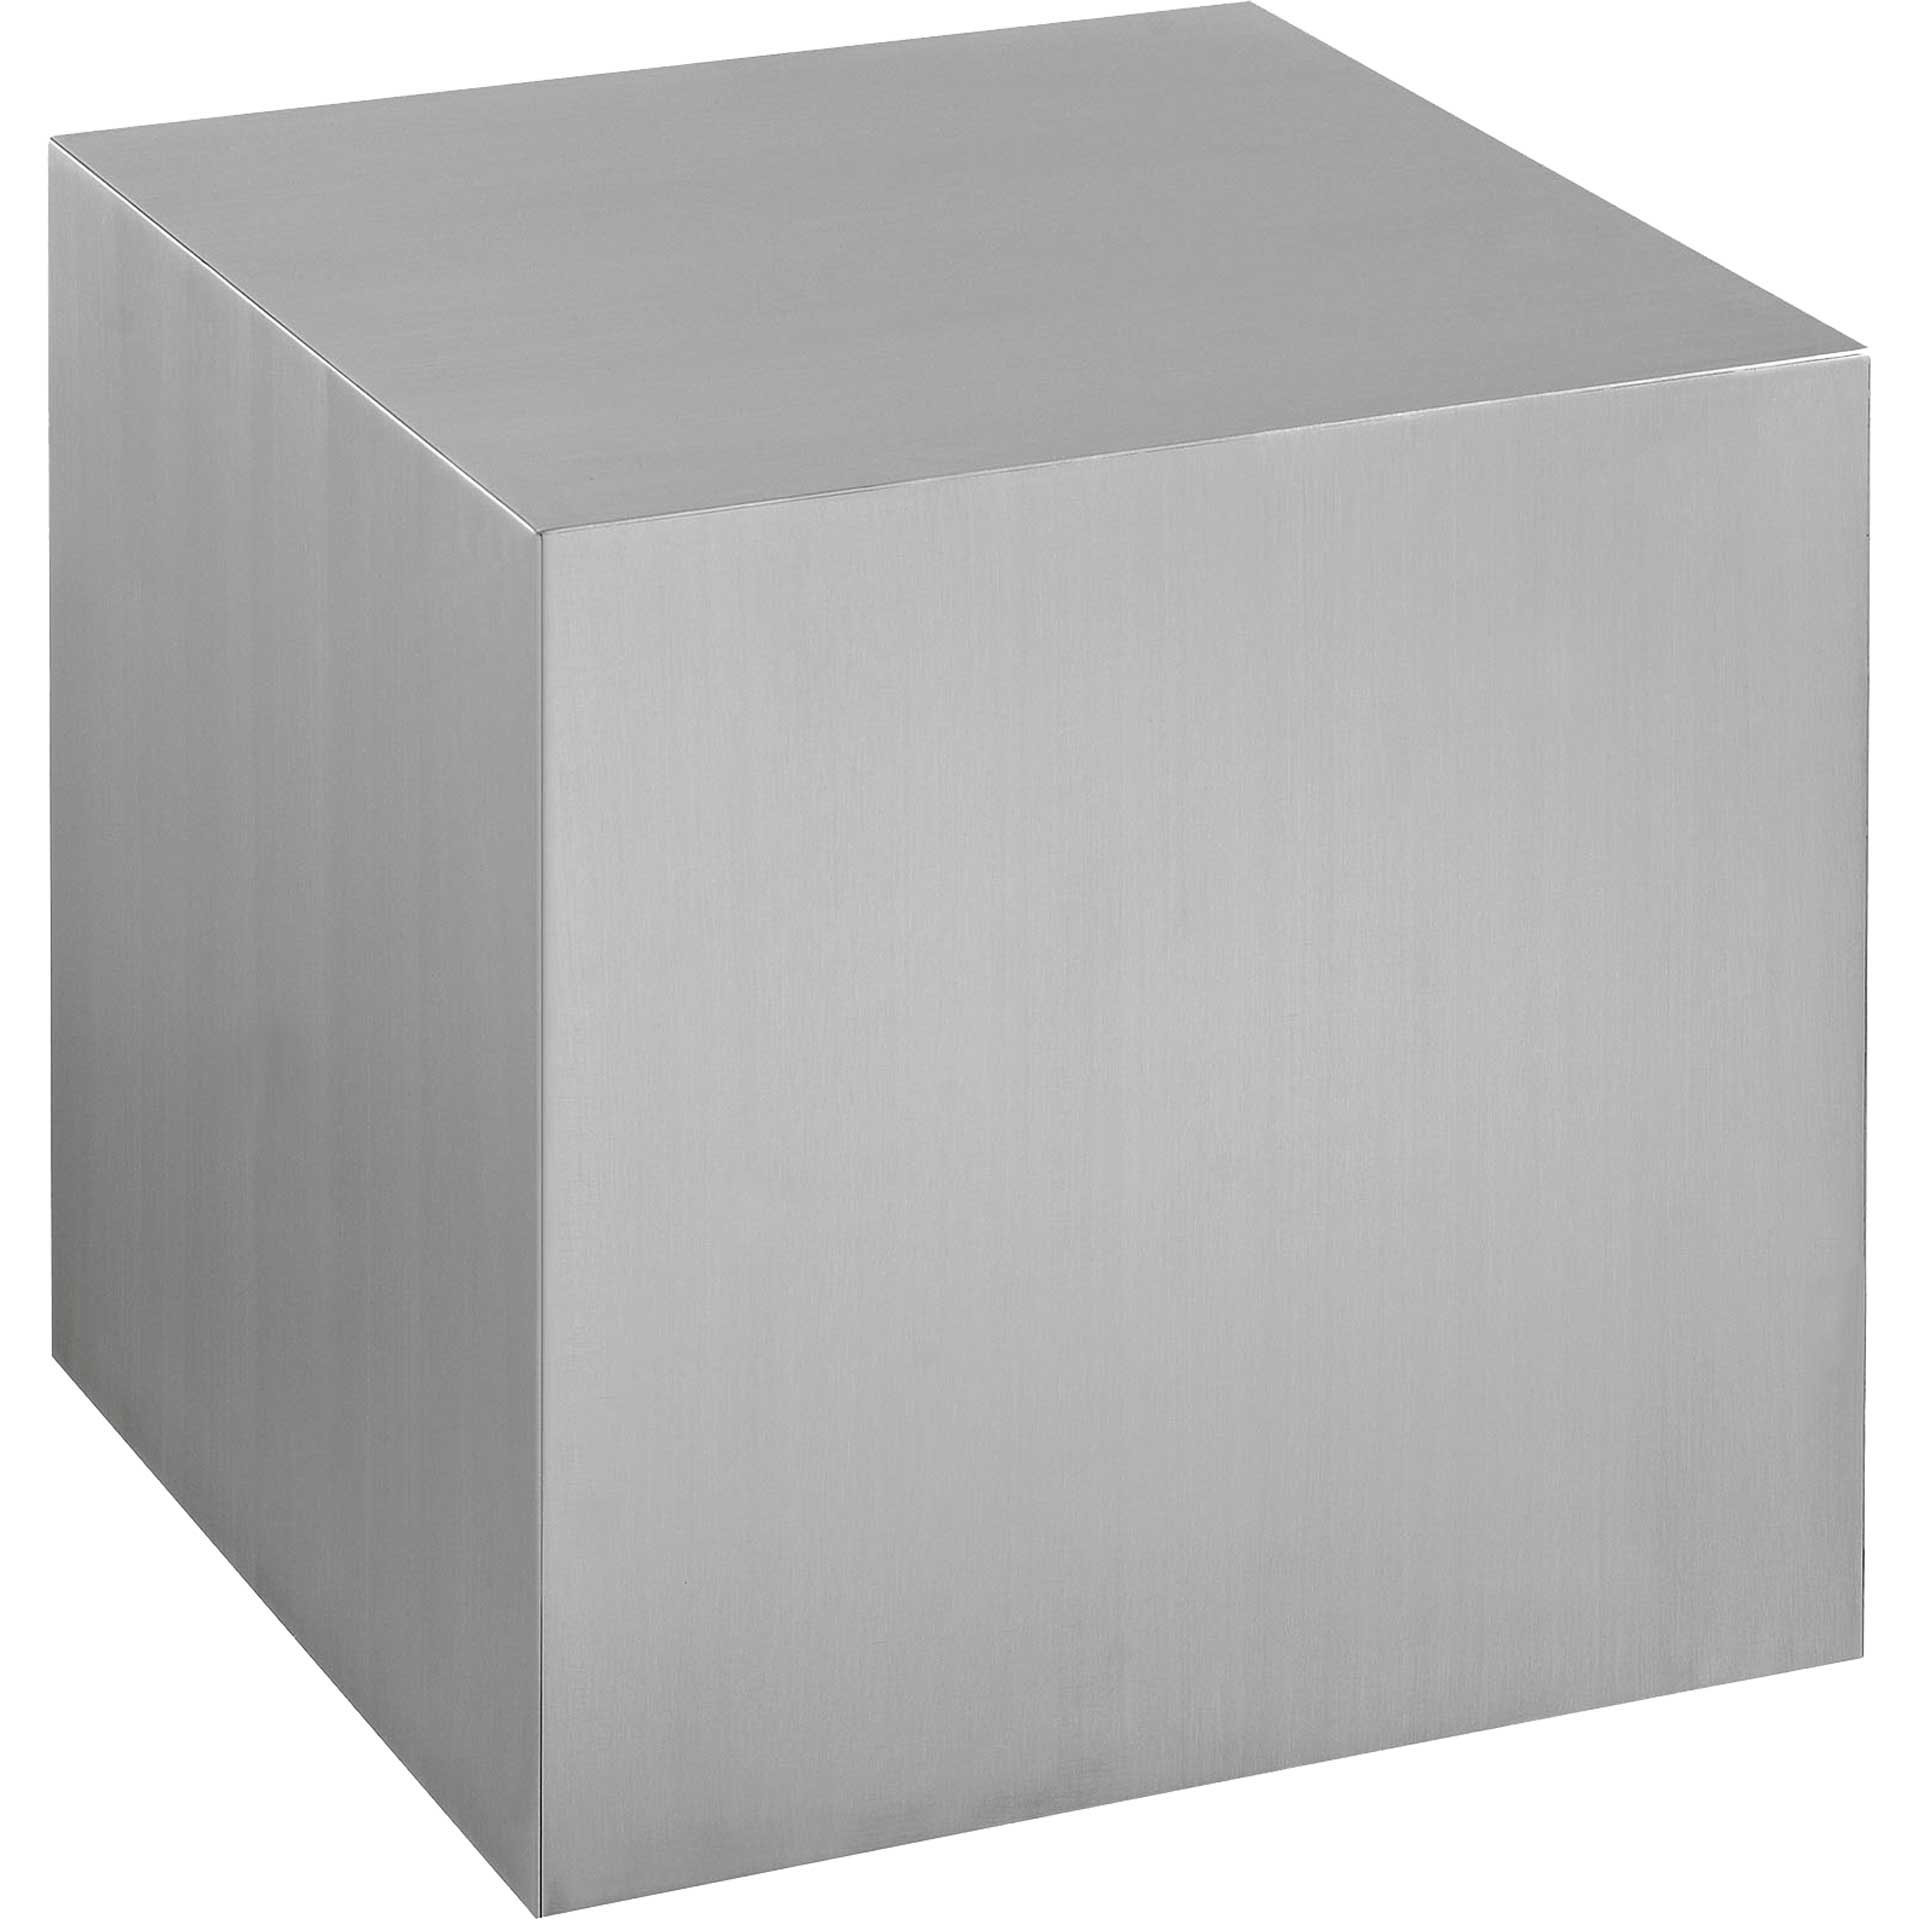 Cabin Stainless Steel Side Table Silver